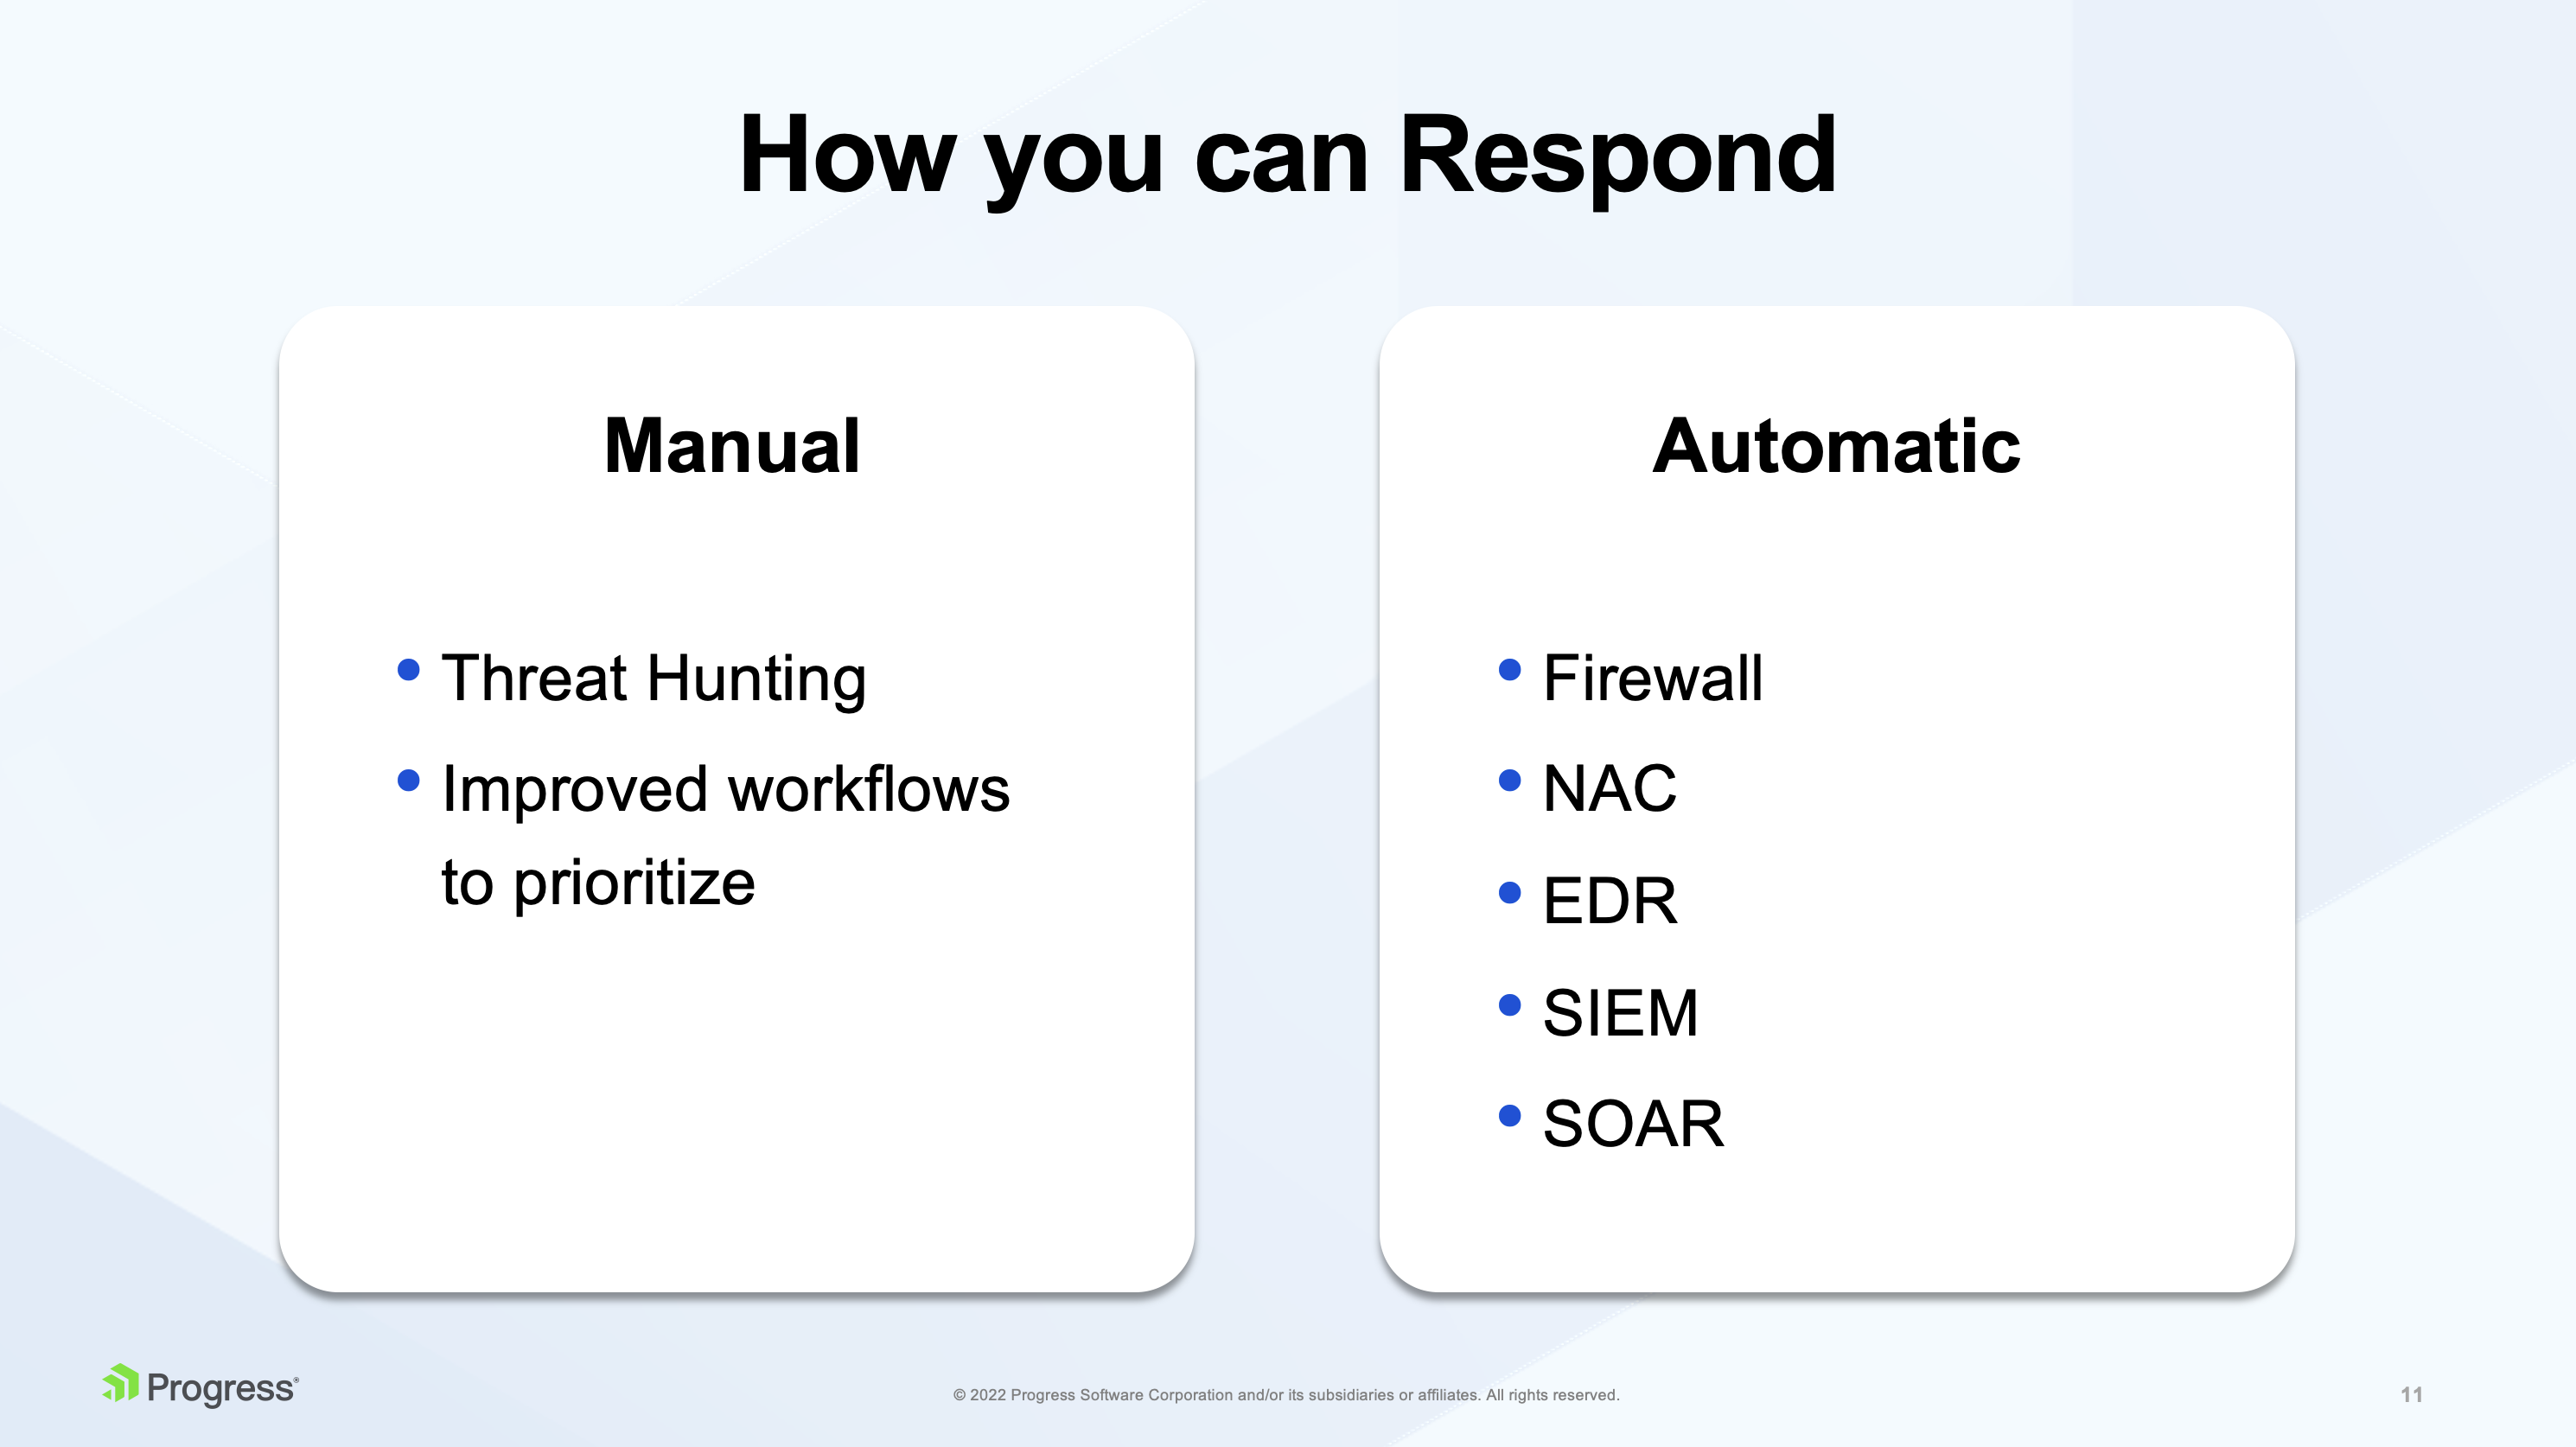 The picture presents how Response capabilities of NDR solutions can be divided into two groups – Manual Response and Automatic Response.​  